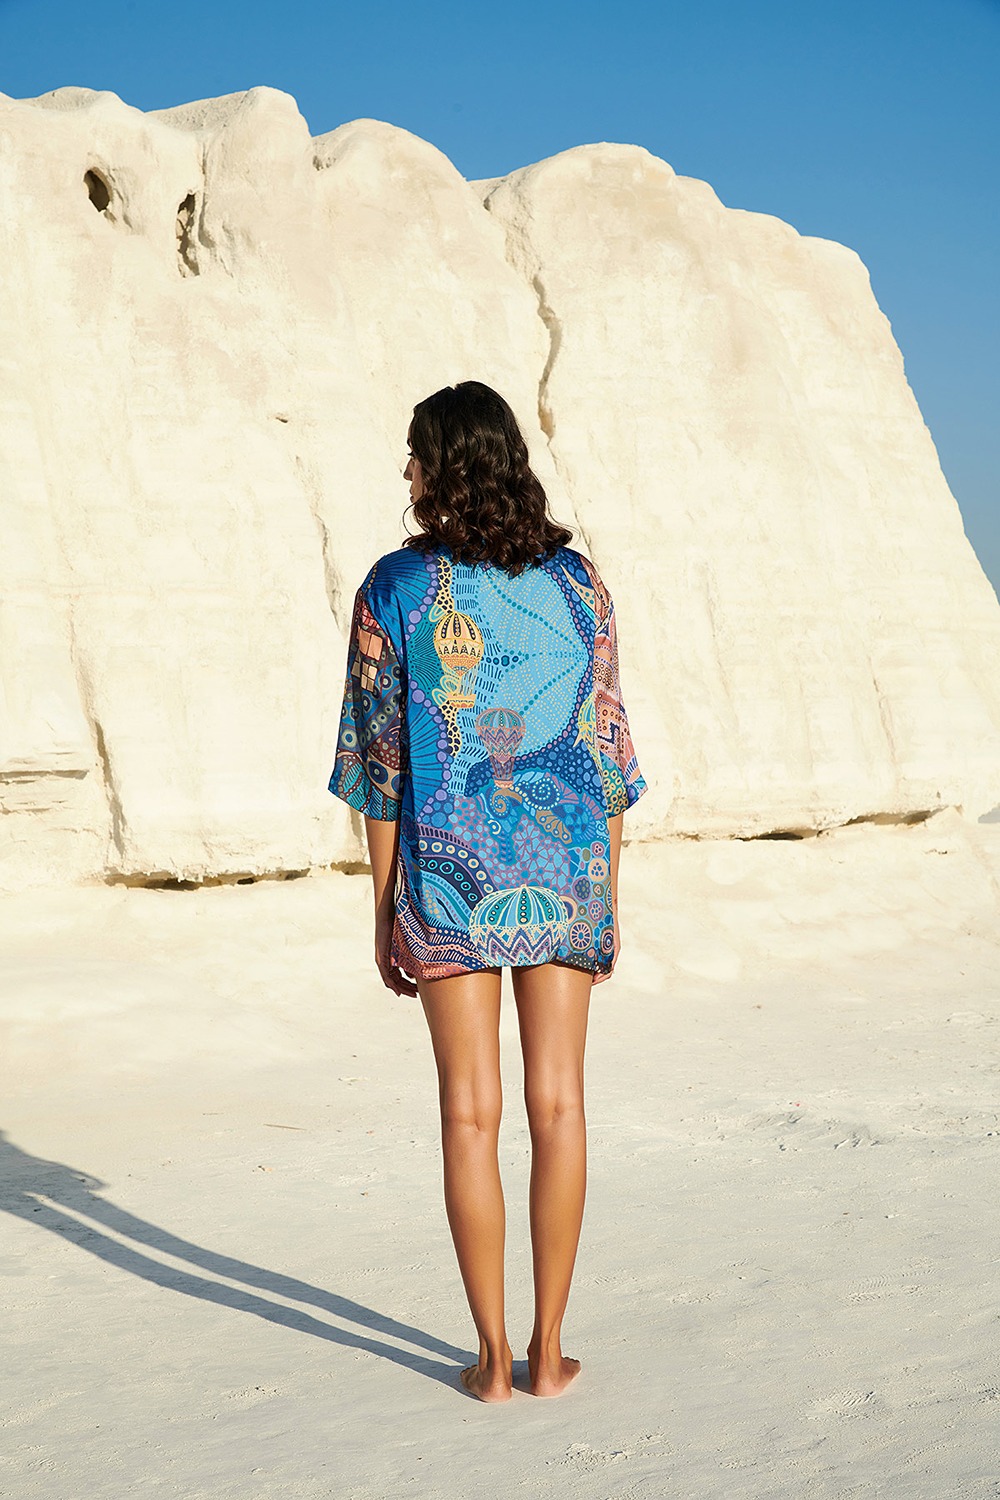 Halter Summer Swimsuit Paired With Endless Summer Shirt In Cappadoccia